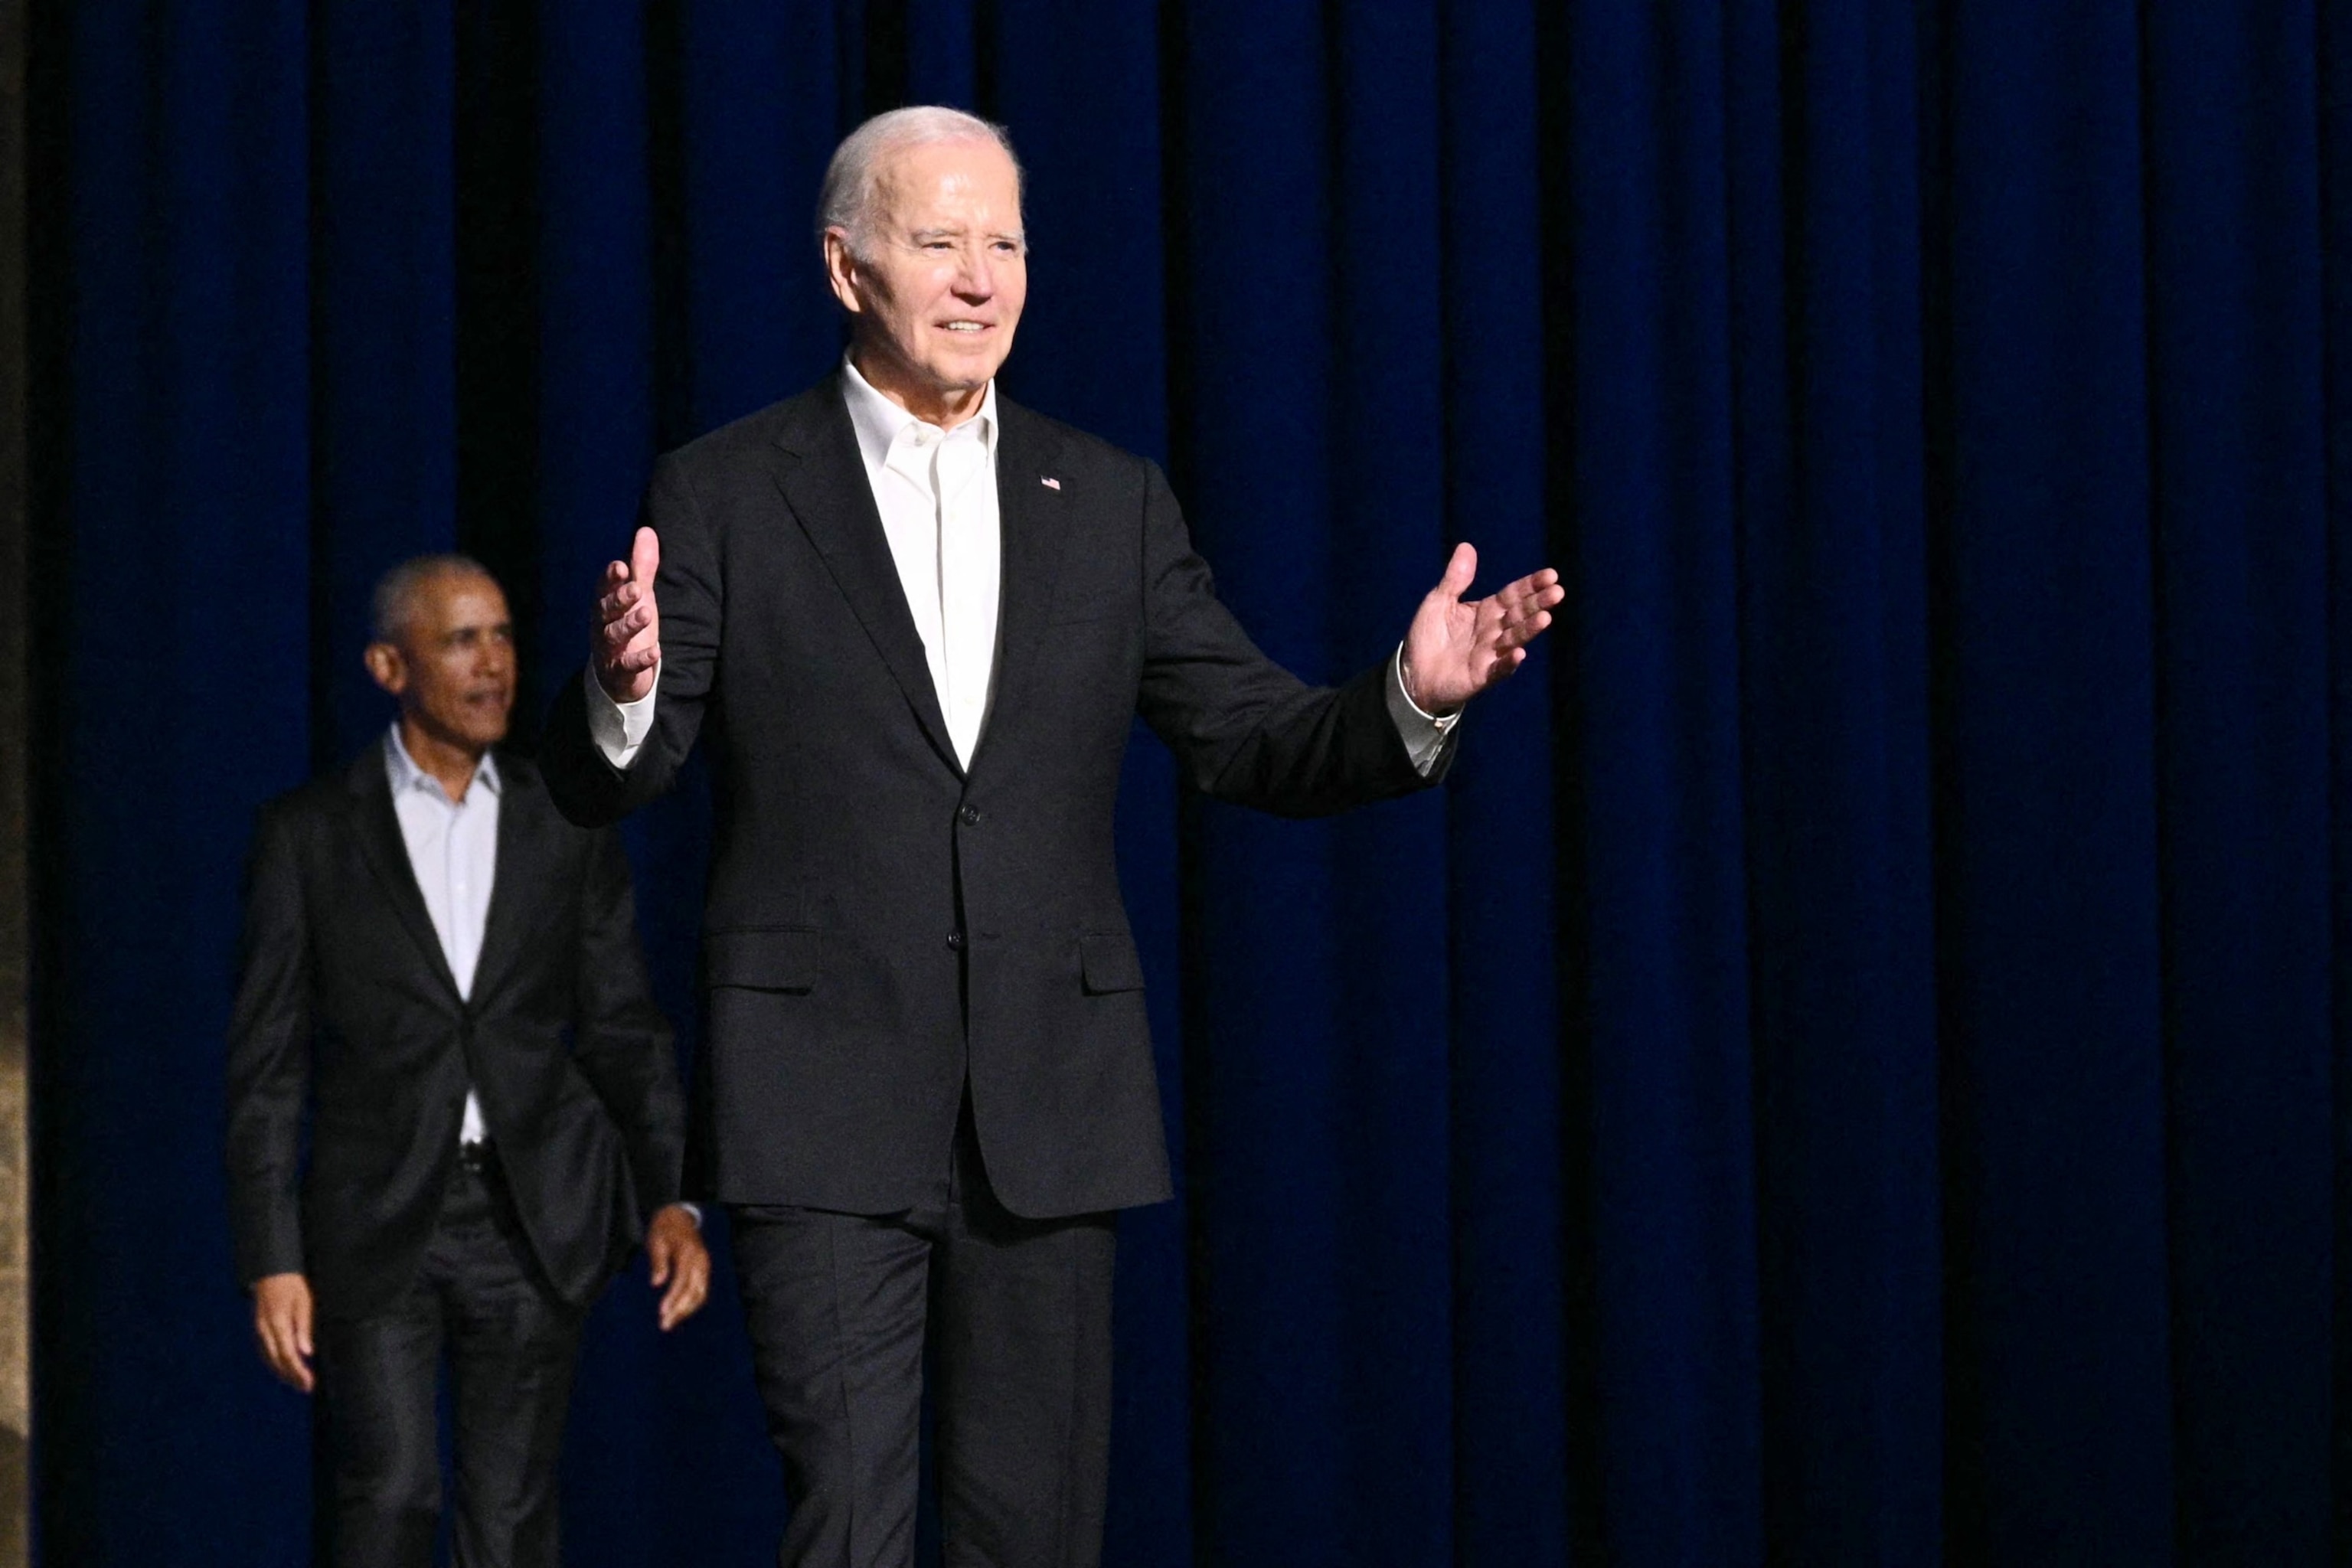 PHOTO: President Joe Biden (R) gestures as he arrives onstage with former President Barack Obama during a campaign fundraiser at the Peacock Theater in Los Angeles on June 15, 2024.